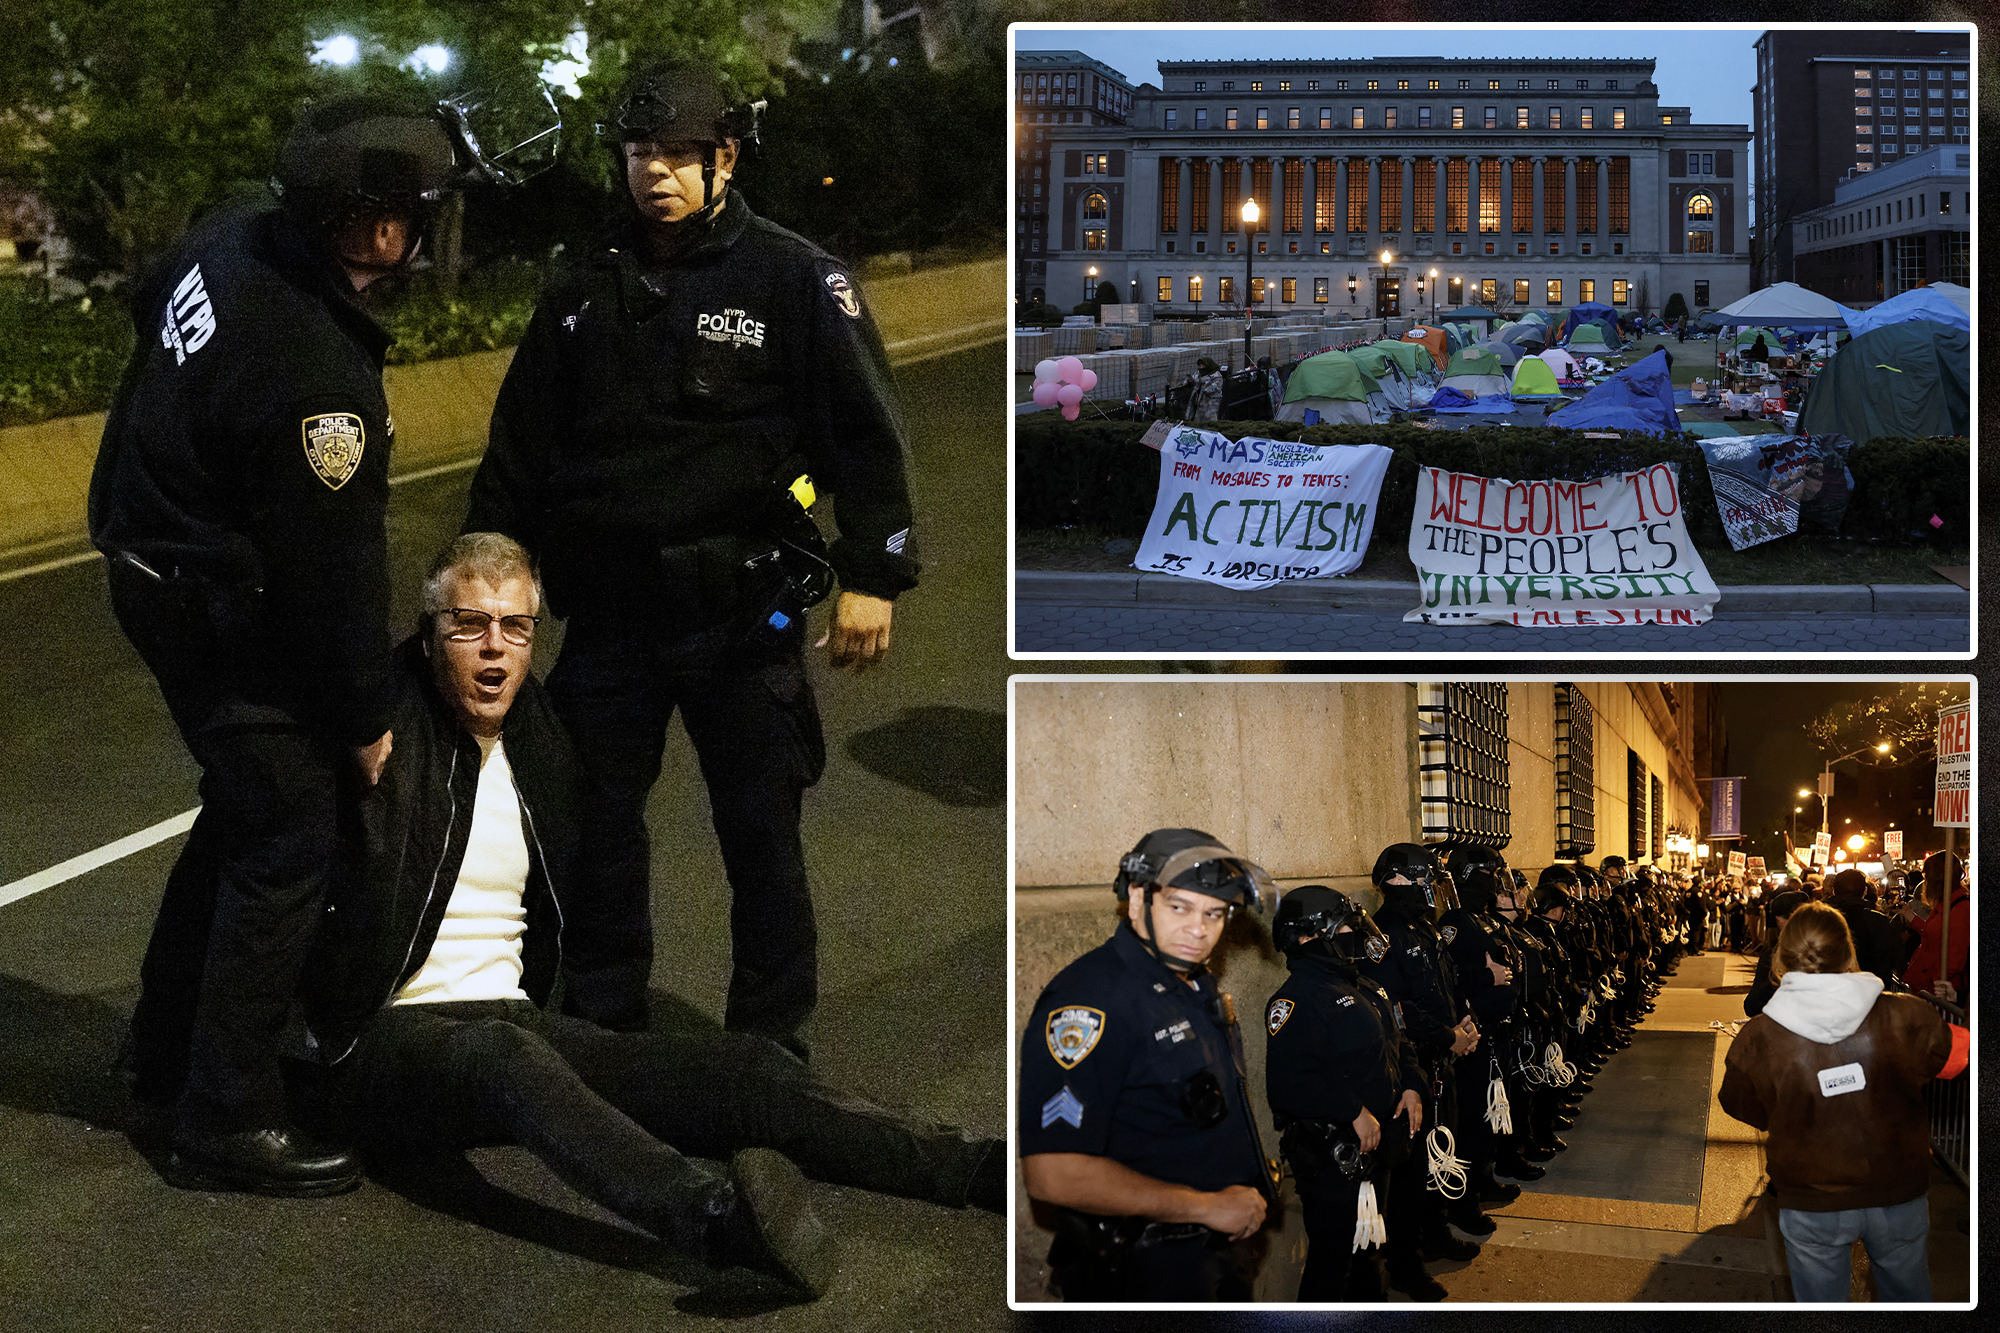 riot police at columbia, protesters tents set up past deadline